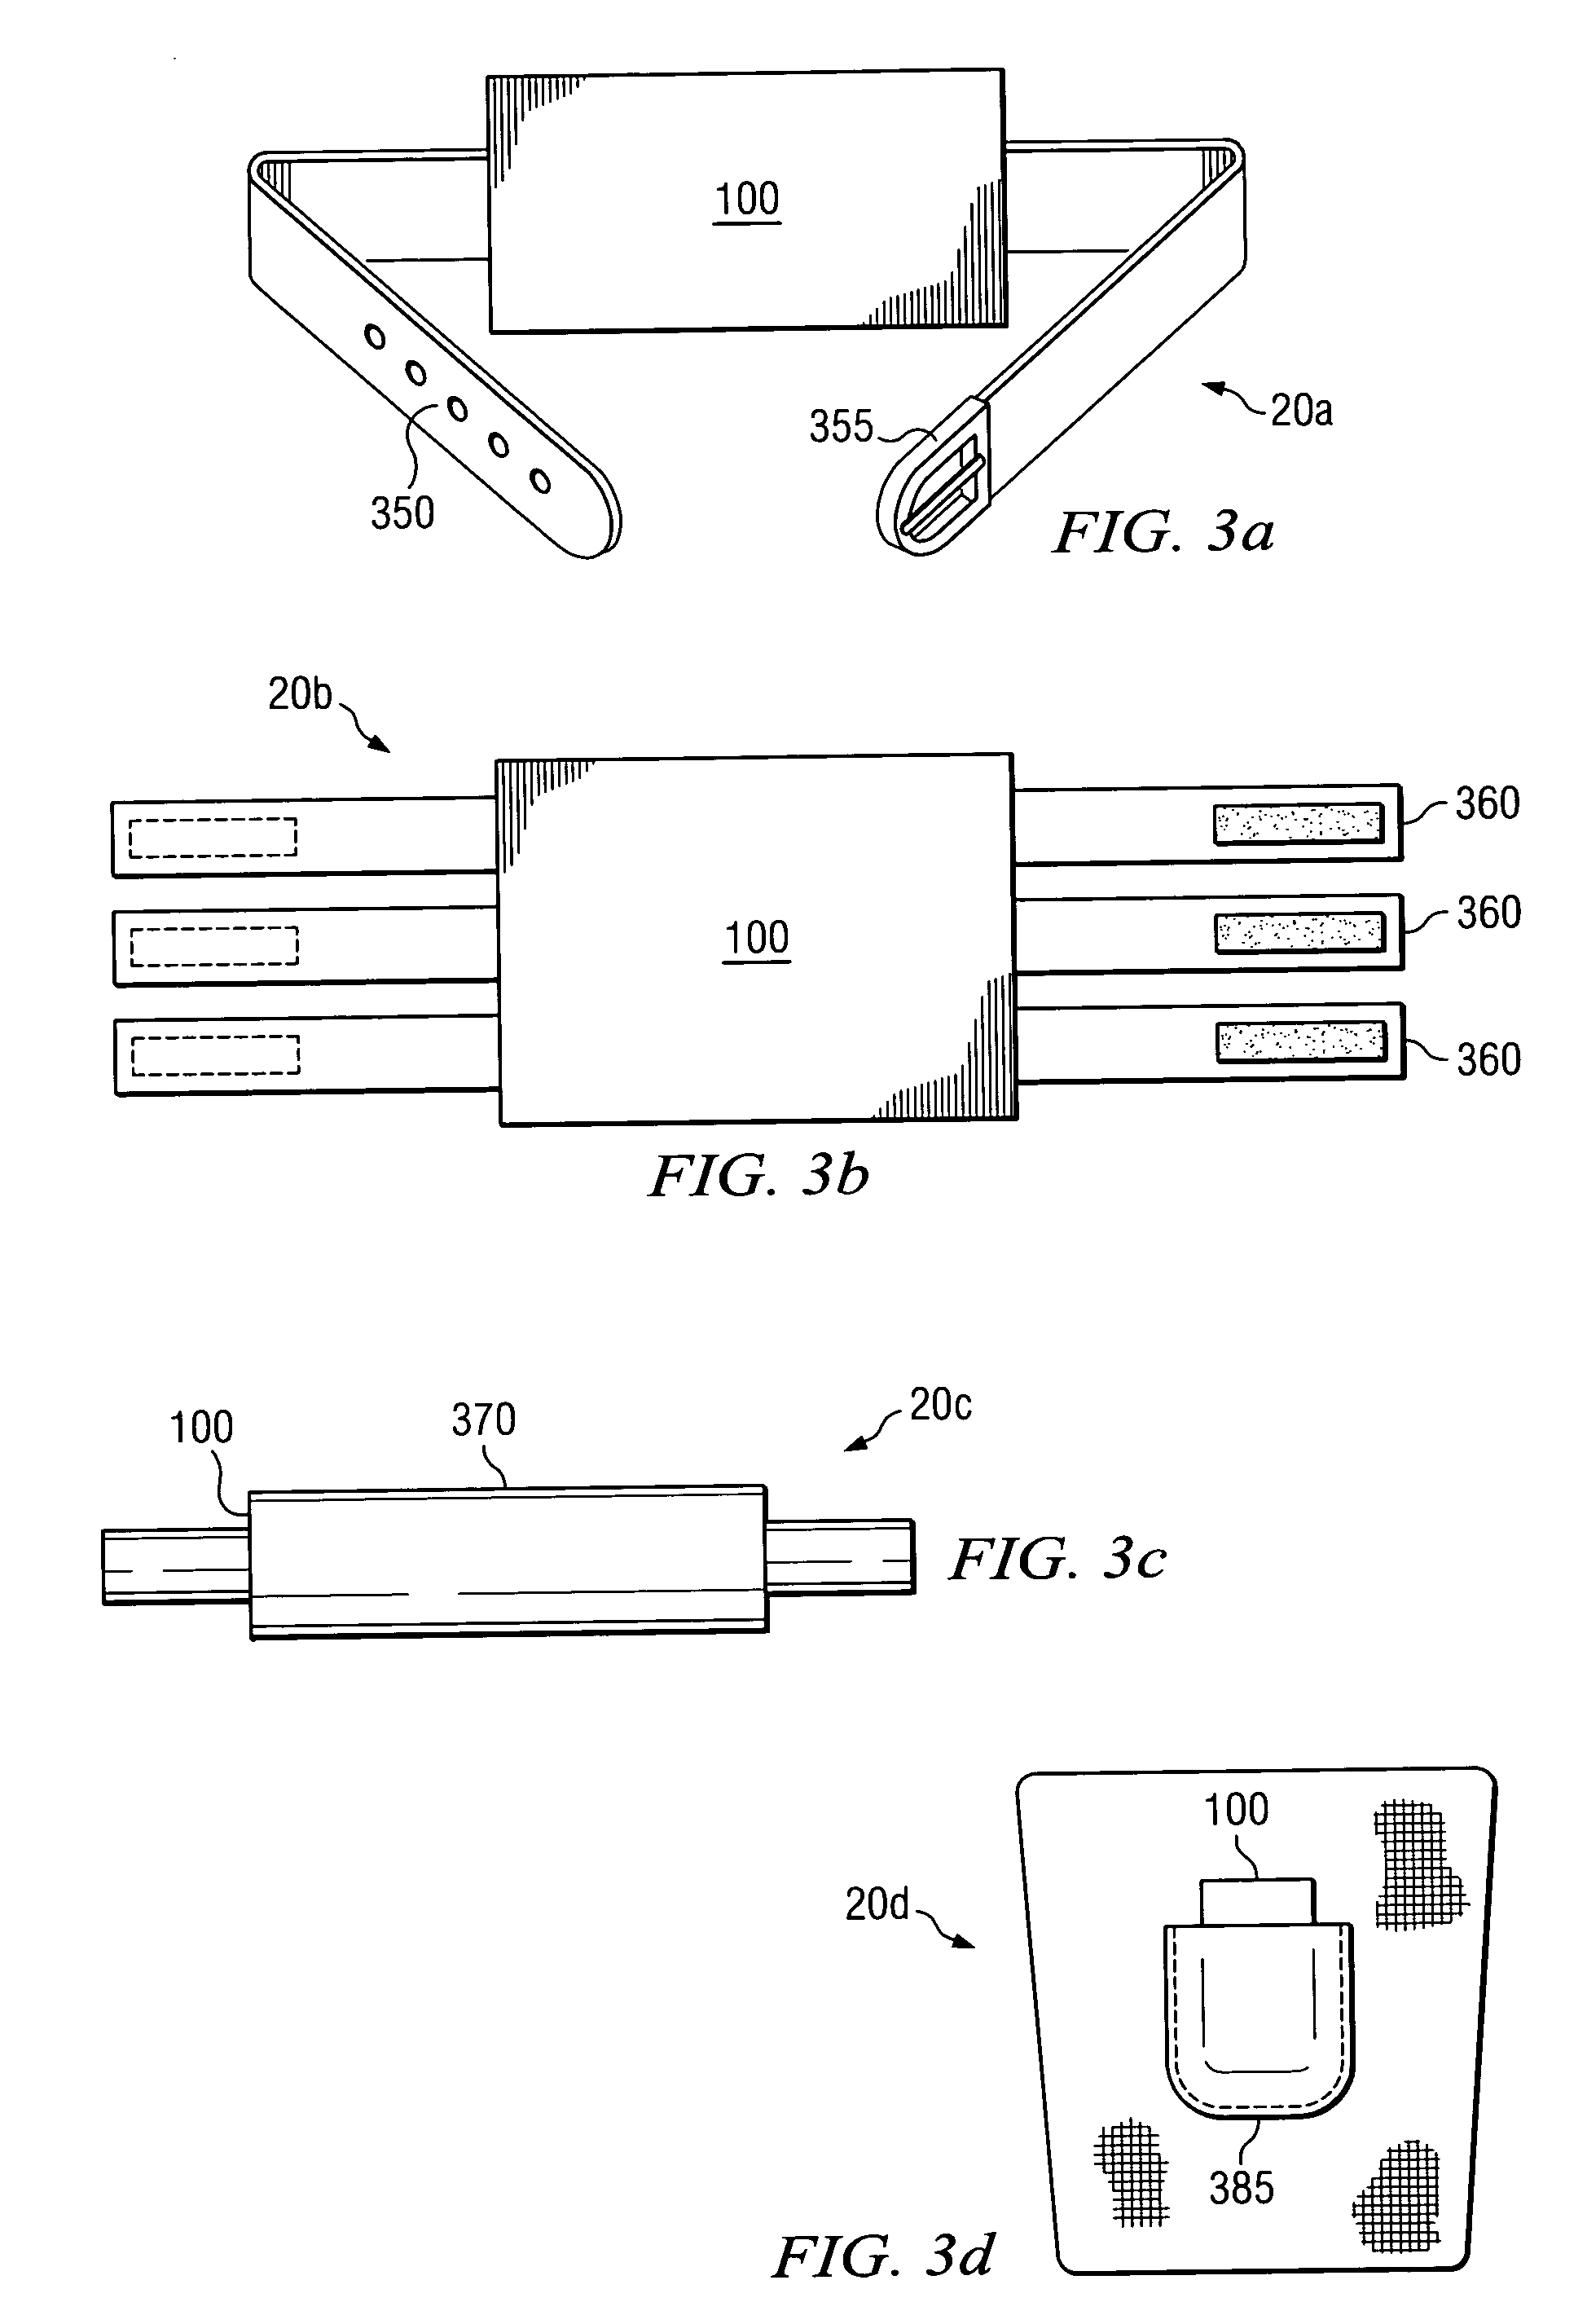 Position monitoring device